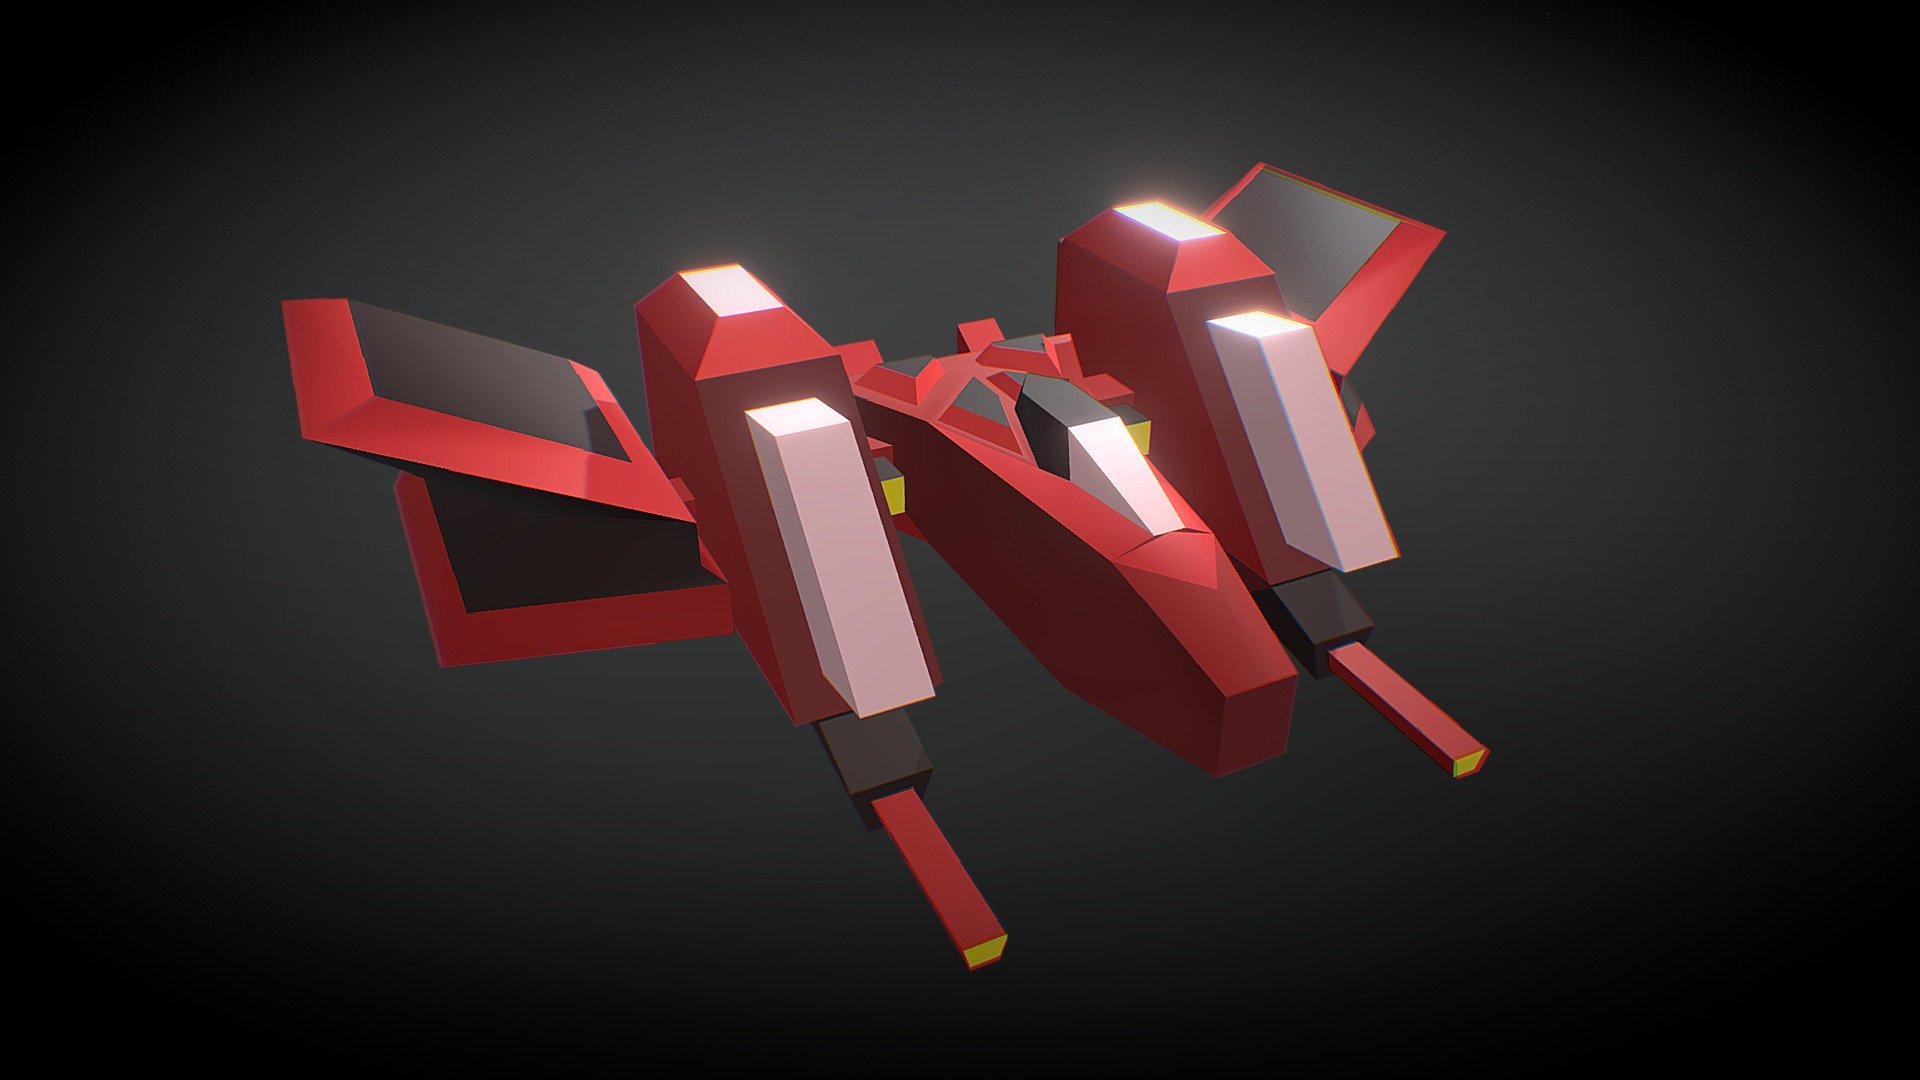 Here is another model with some vertex coloring, this time a space craft that looks like something out of a retro SHMUP.

Enjoy, and let me know if you'd like to see more like this!
It would be a lot of fun to make a series of fighters with different ship types, colors, and sizes 3d model